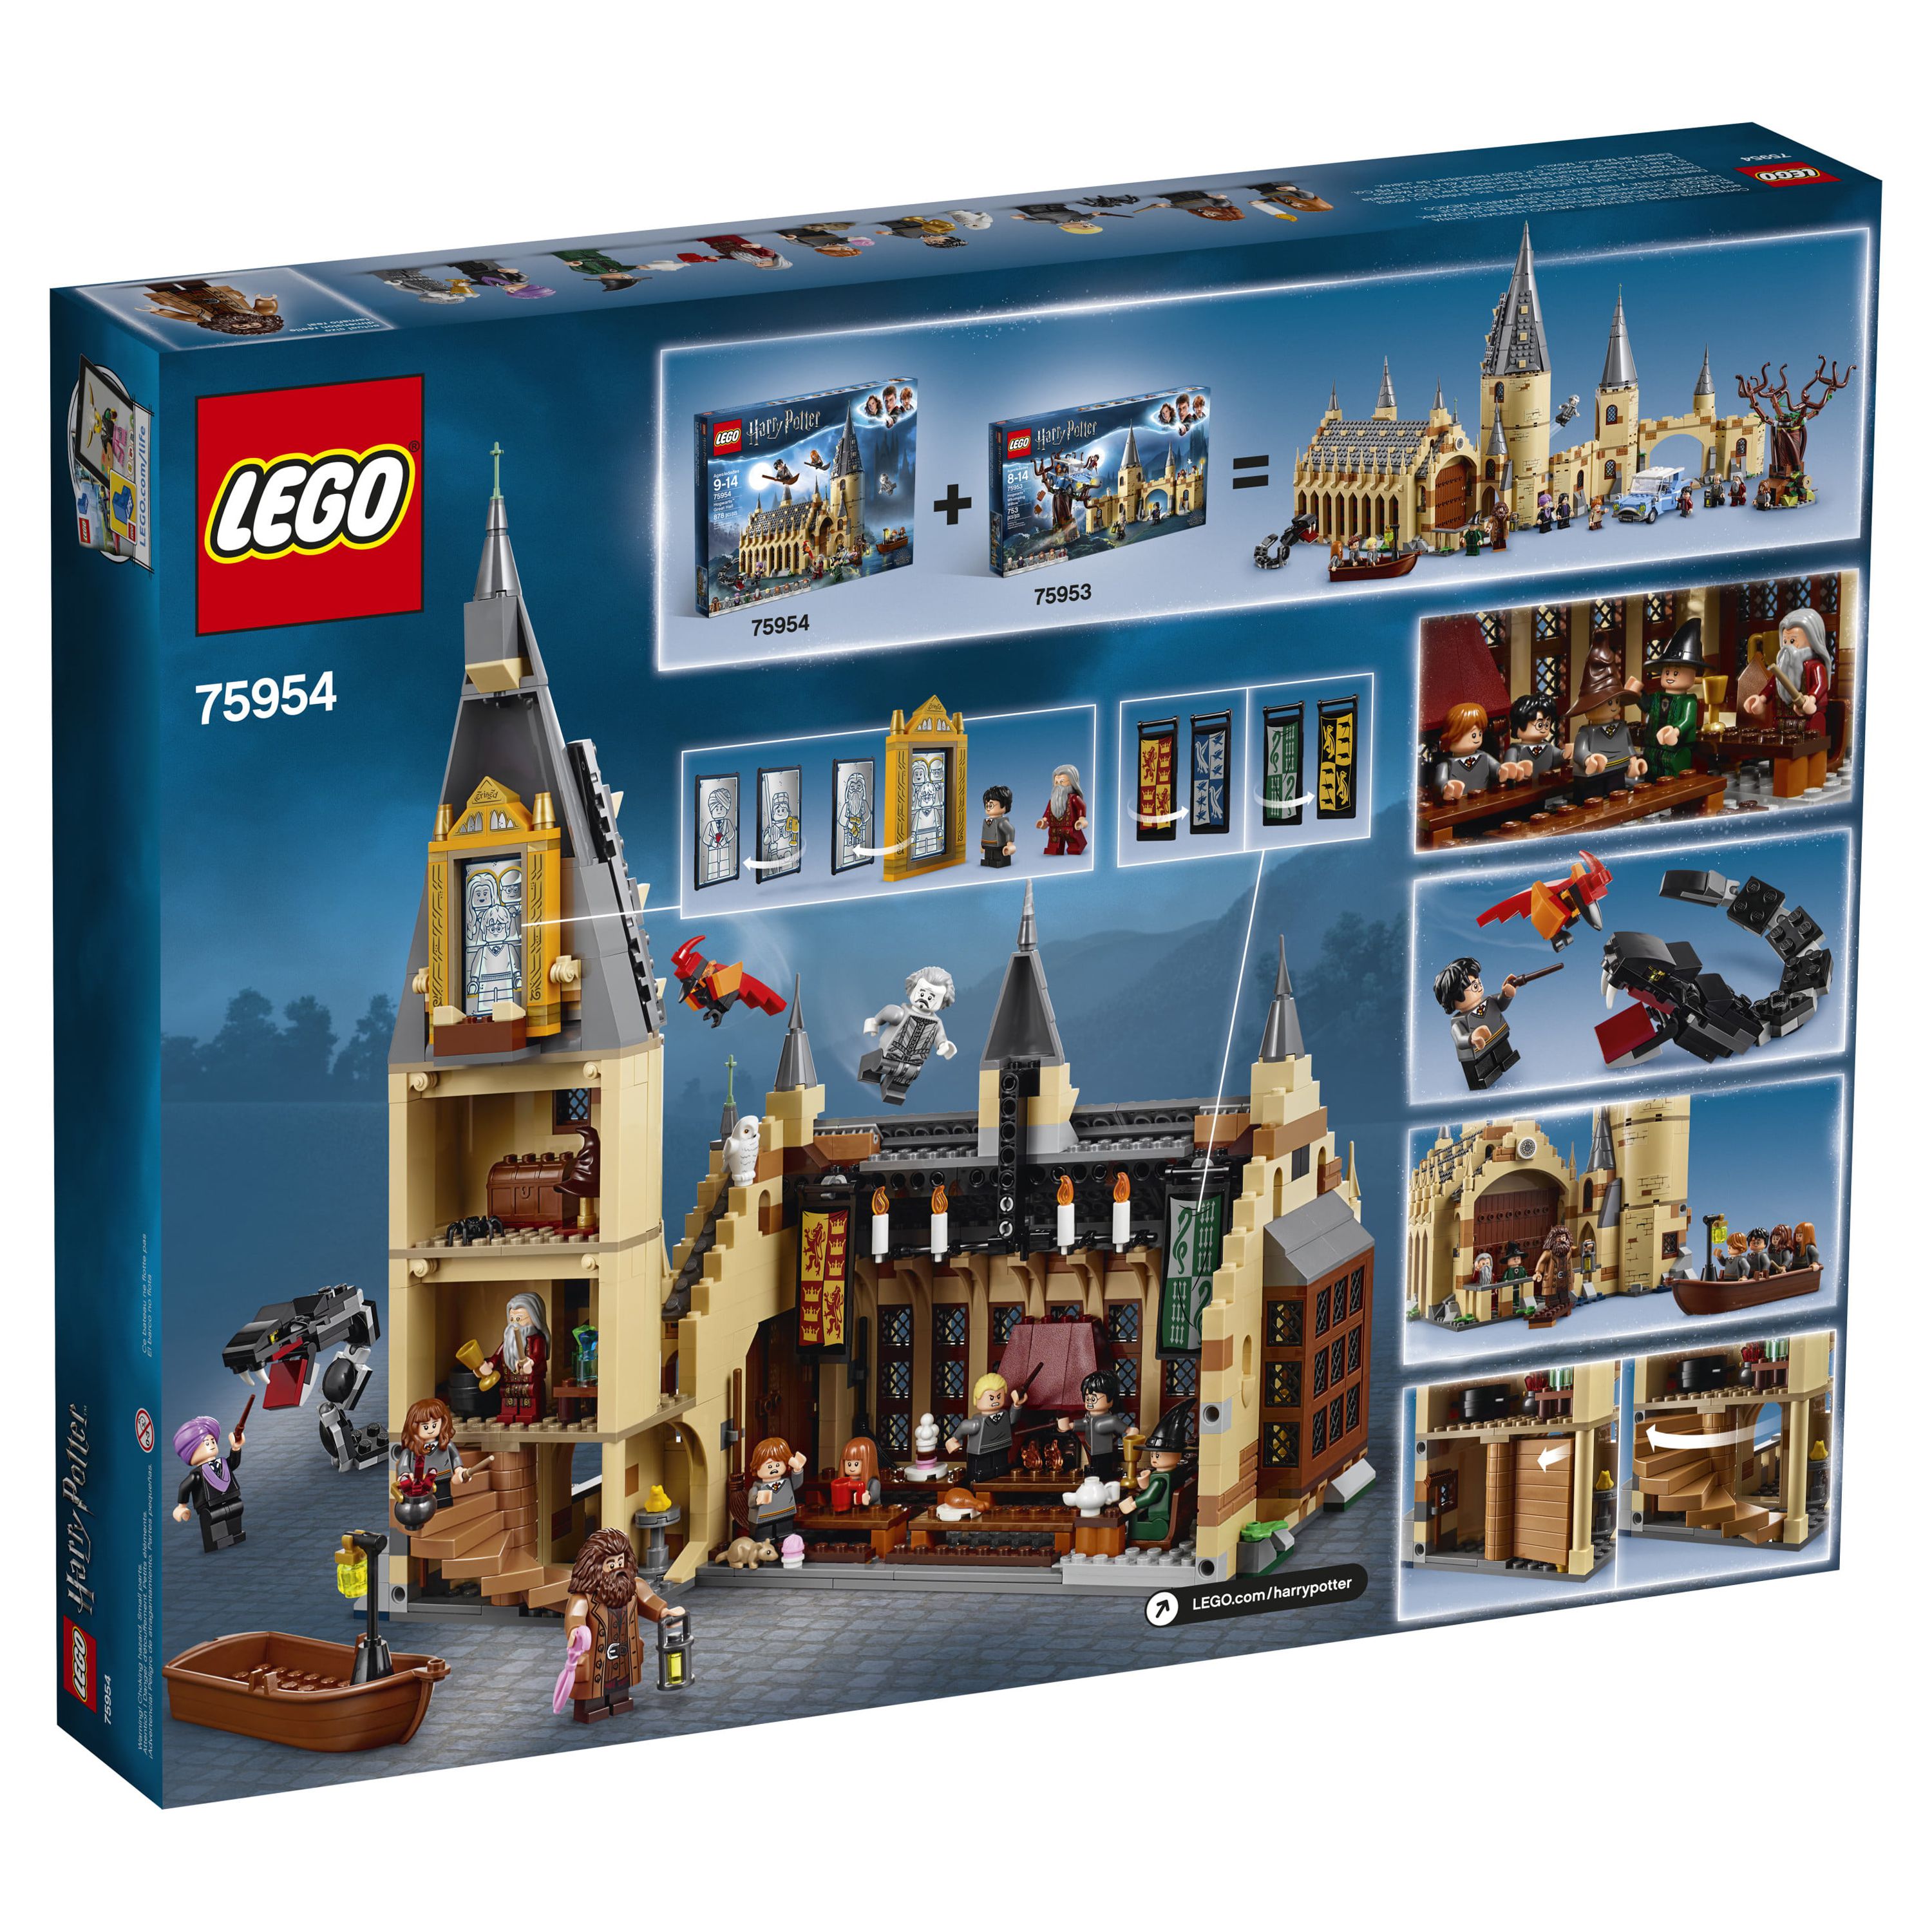 LEGO Harry Potter Hogwarts Great Hall 75954 Toy of the Year 2019 - image 4 of 5